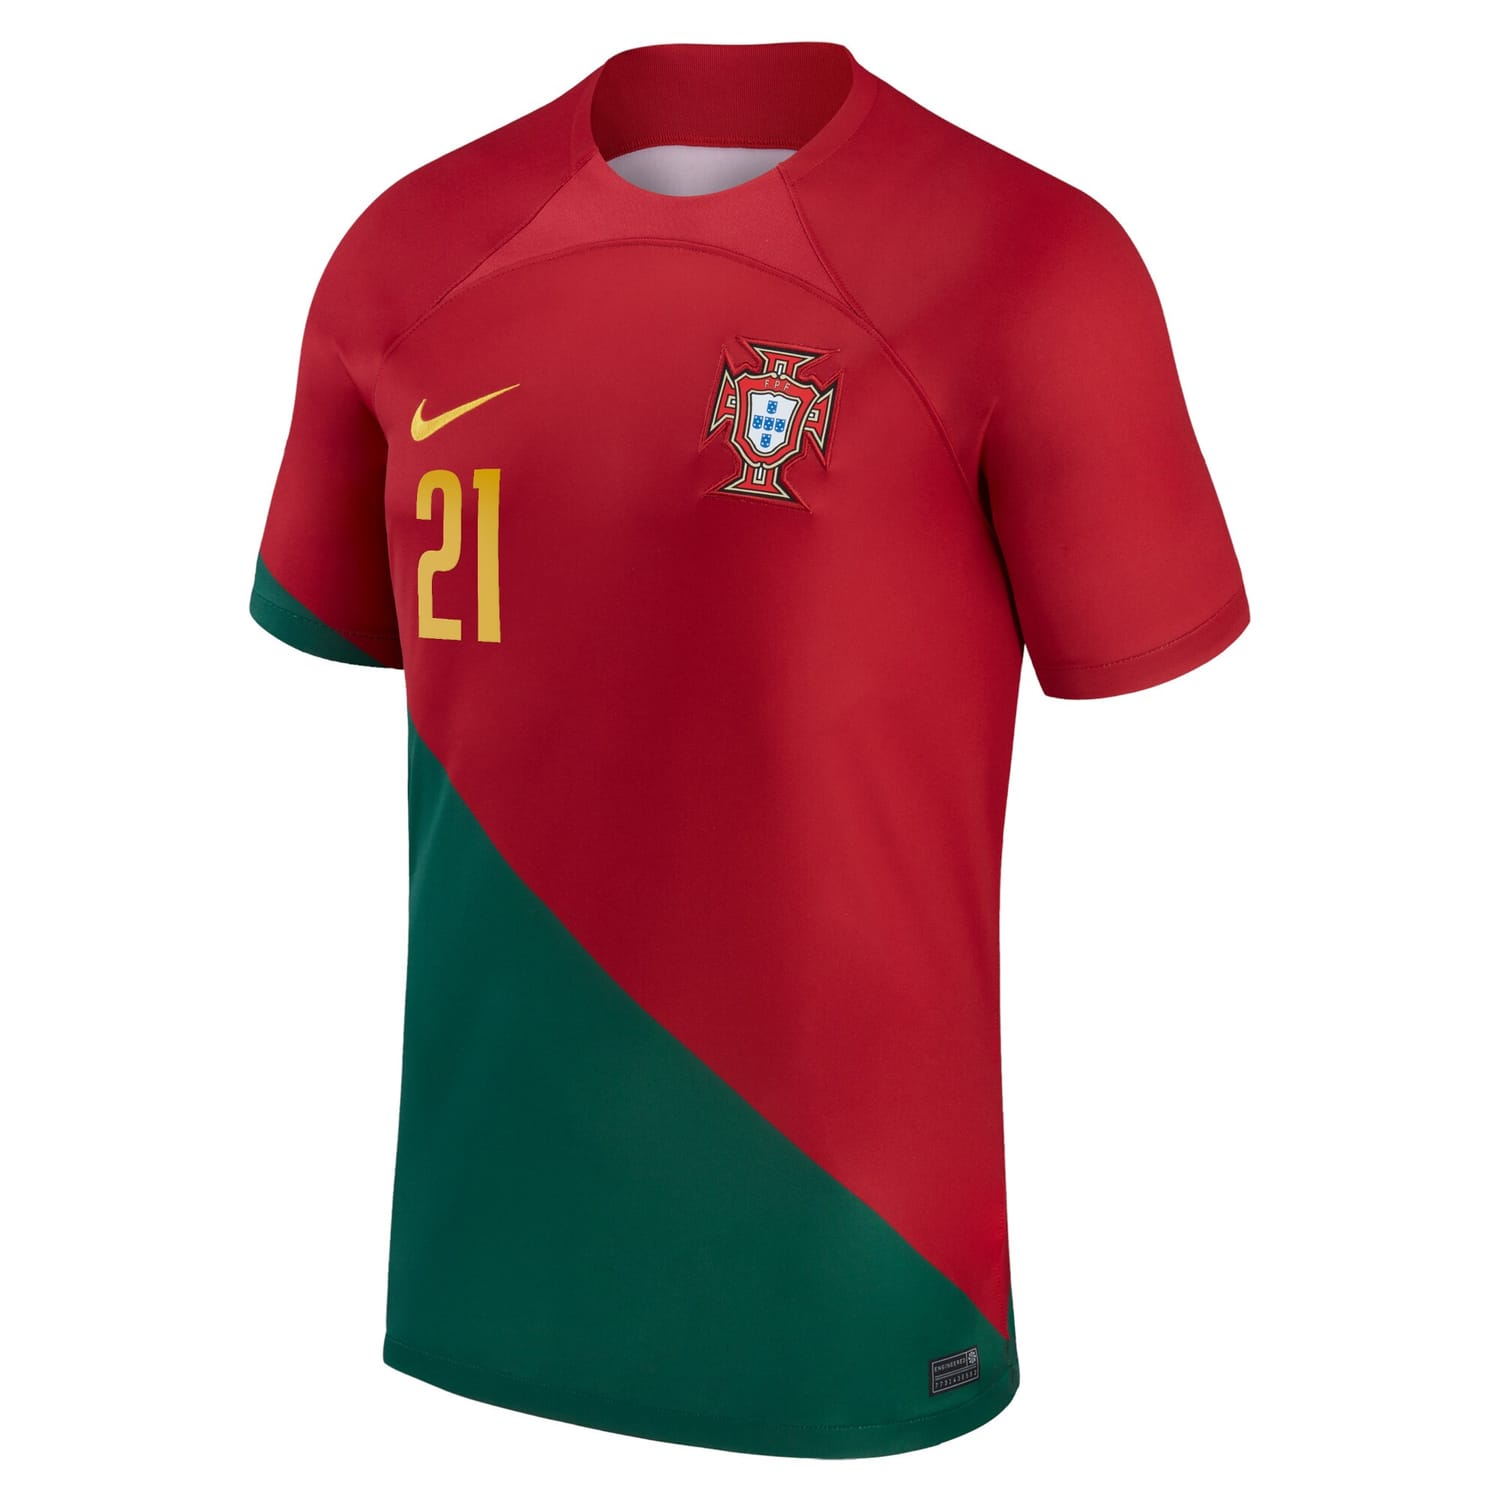 Portugal National Team Home Jersey Shirt Red 2022-23 player Diogo Jota printing for Men